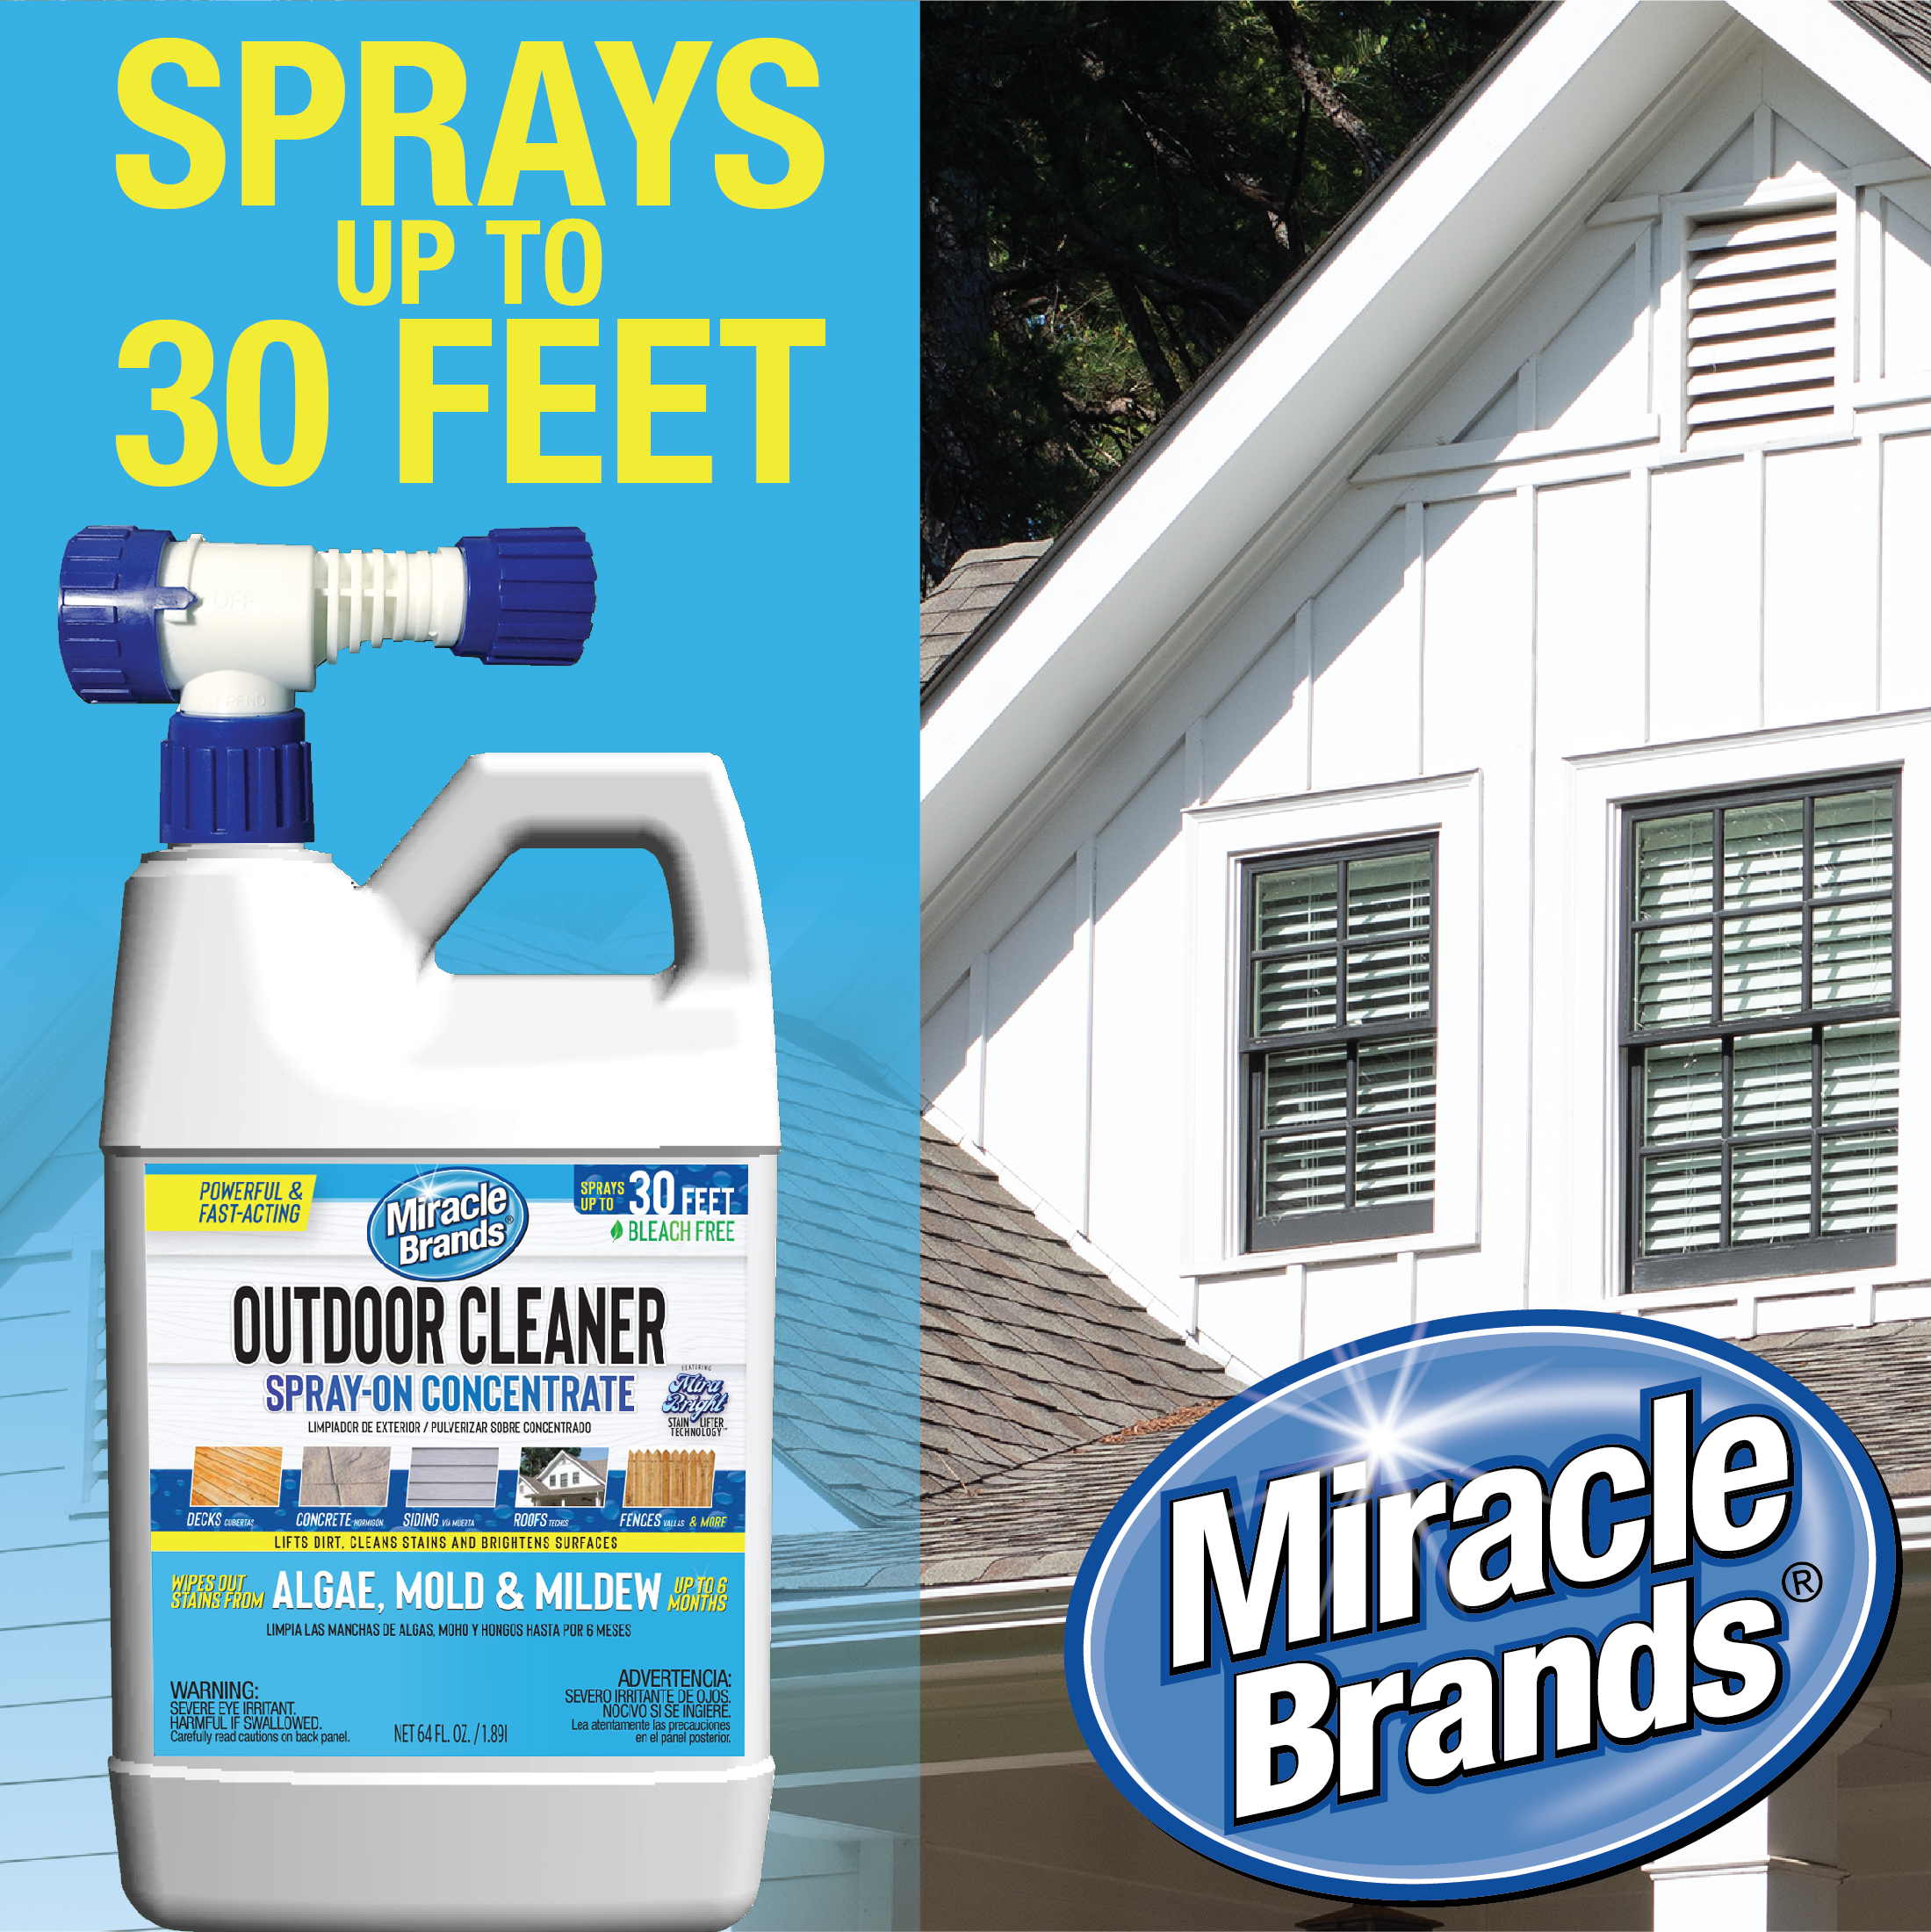 Miracle Brands Outdoor Cleaner Spray On Concentrate for Algae, Mold and Mildew, 64 oz - image 4 of 10